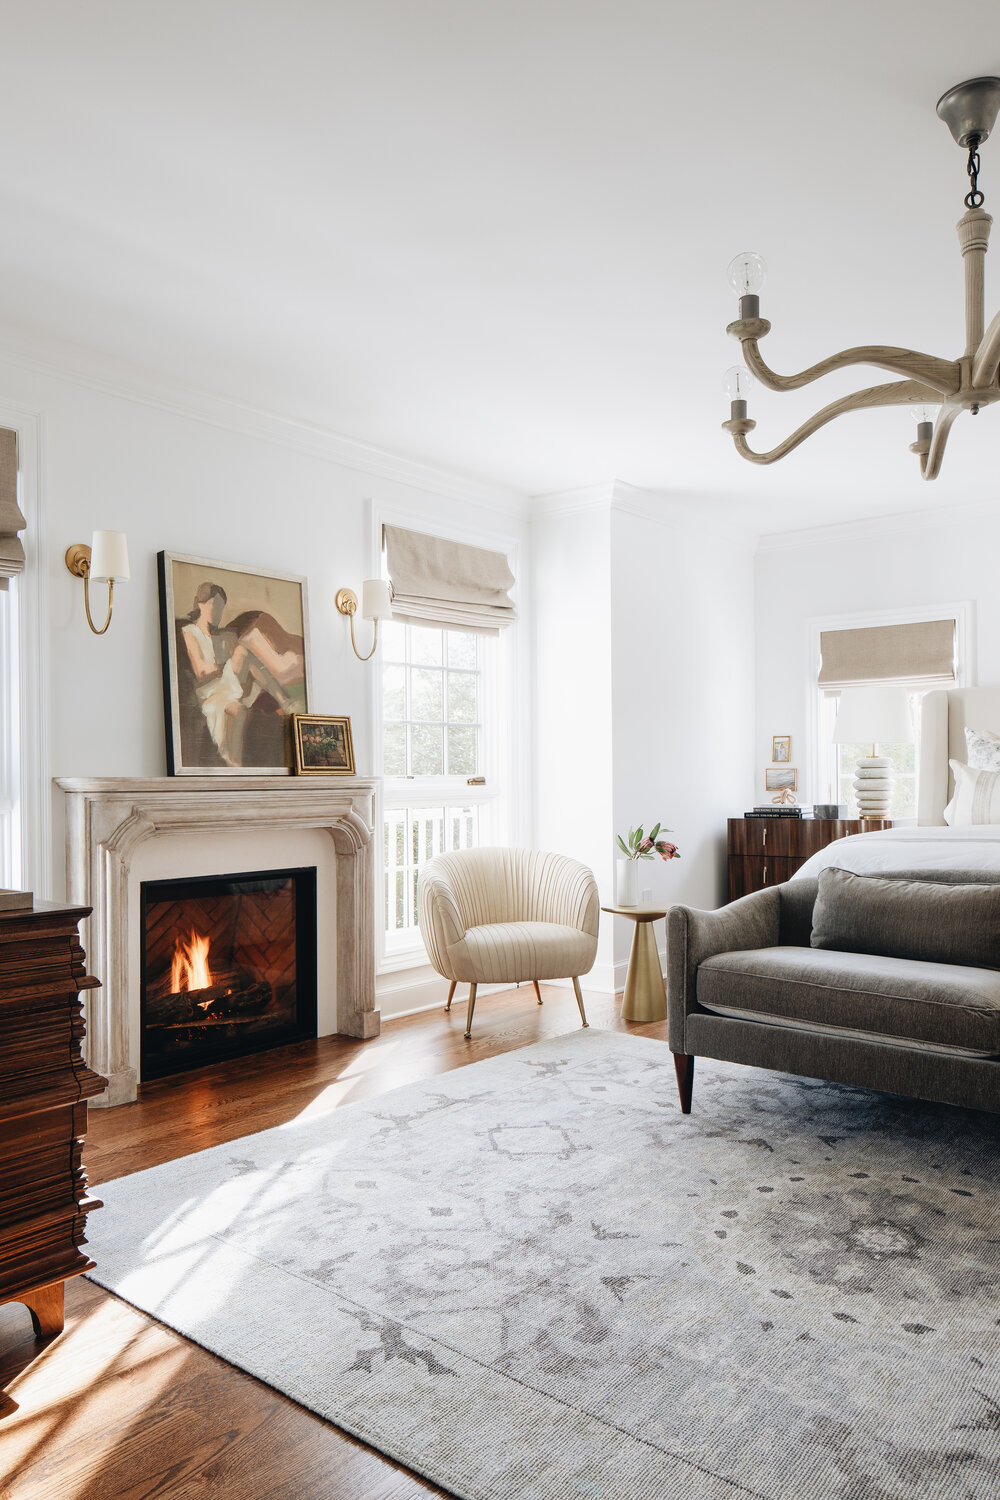 A Luxury Home Tour You Don't Want to Miss | lark & linen